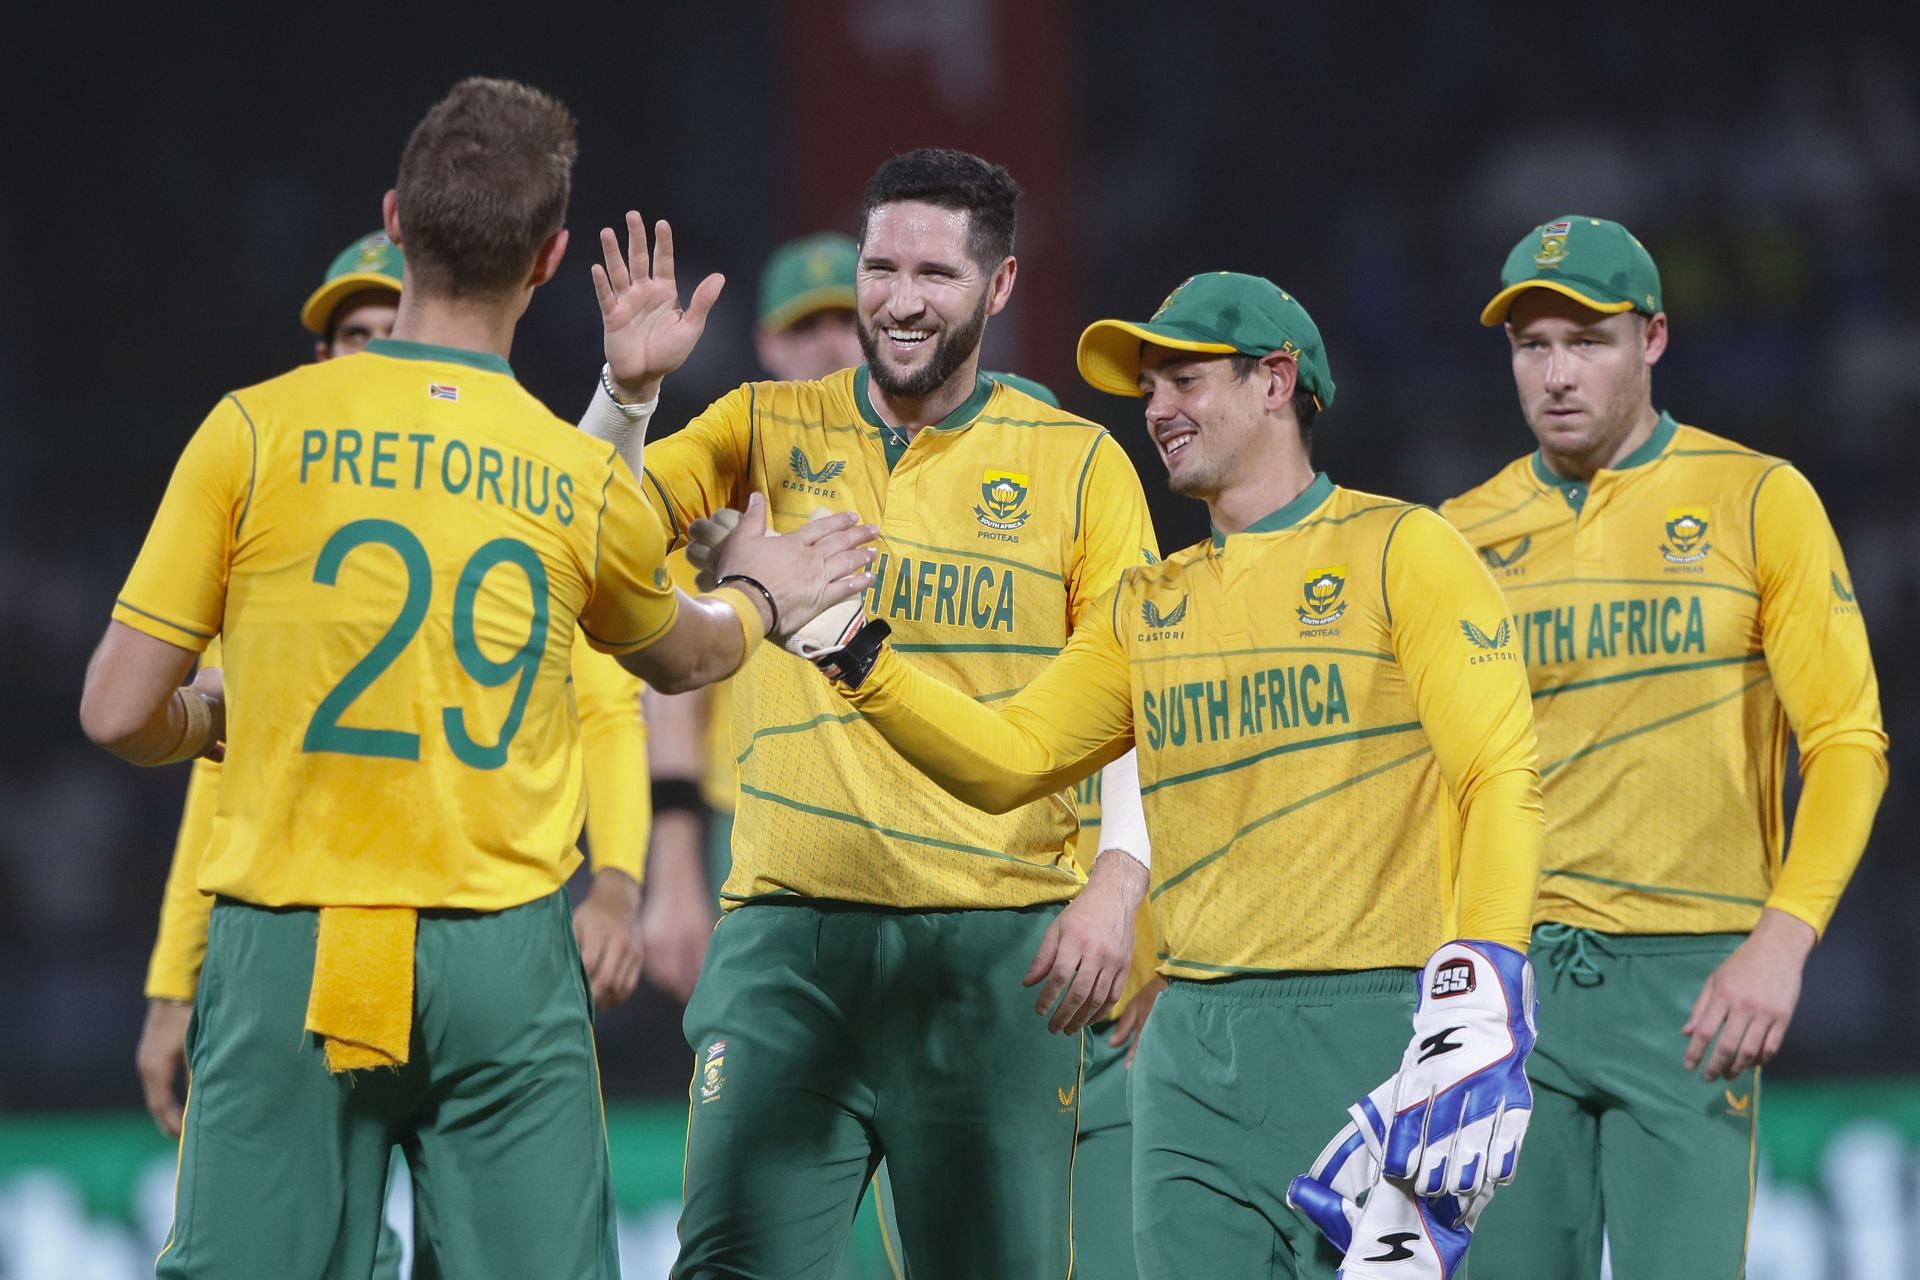 India v South Africa - 1st T20 (Image courtesy: Getty Images)